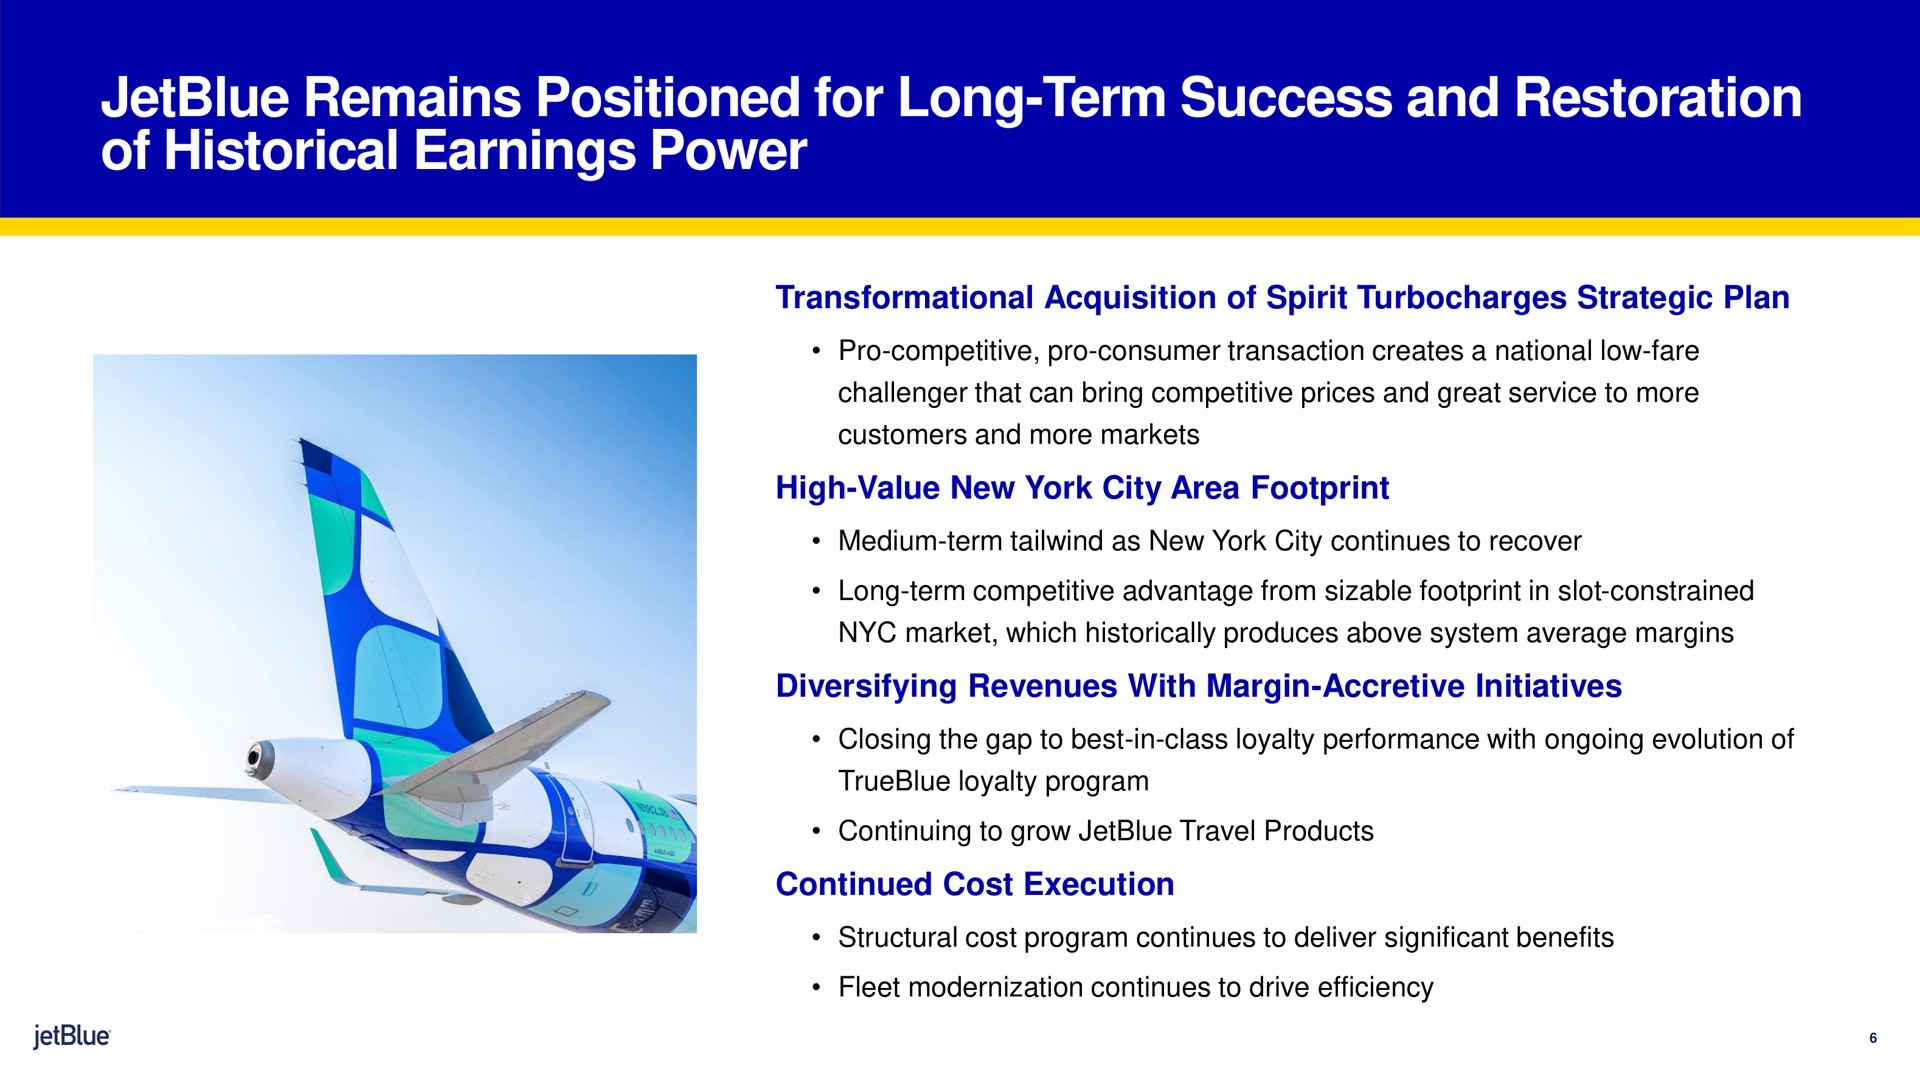 remains positioned for long term success and restoration of historical earnings power acquisition of spirit strategic plan high value new york city area footprint diversifying revenues with margin accretive initiatives continued cost execution | jetBlue